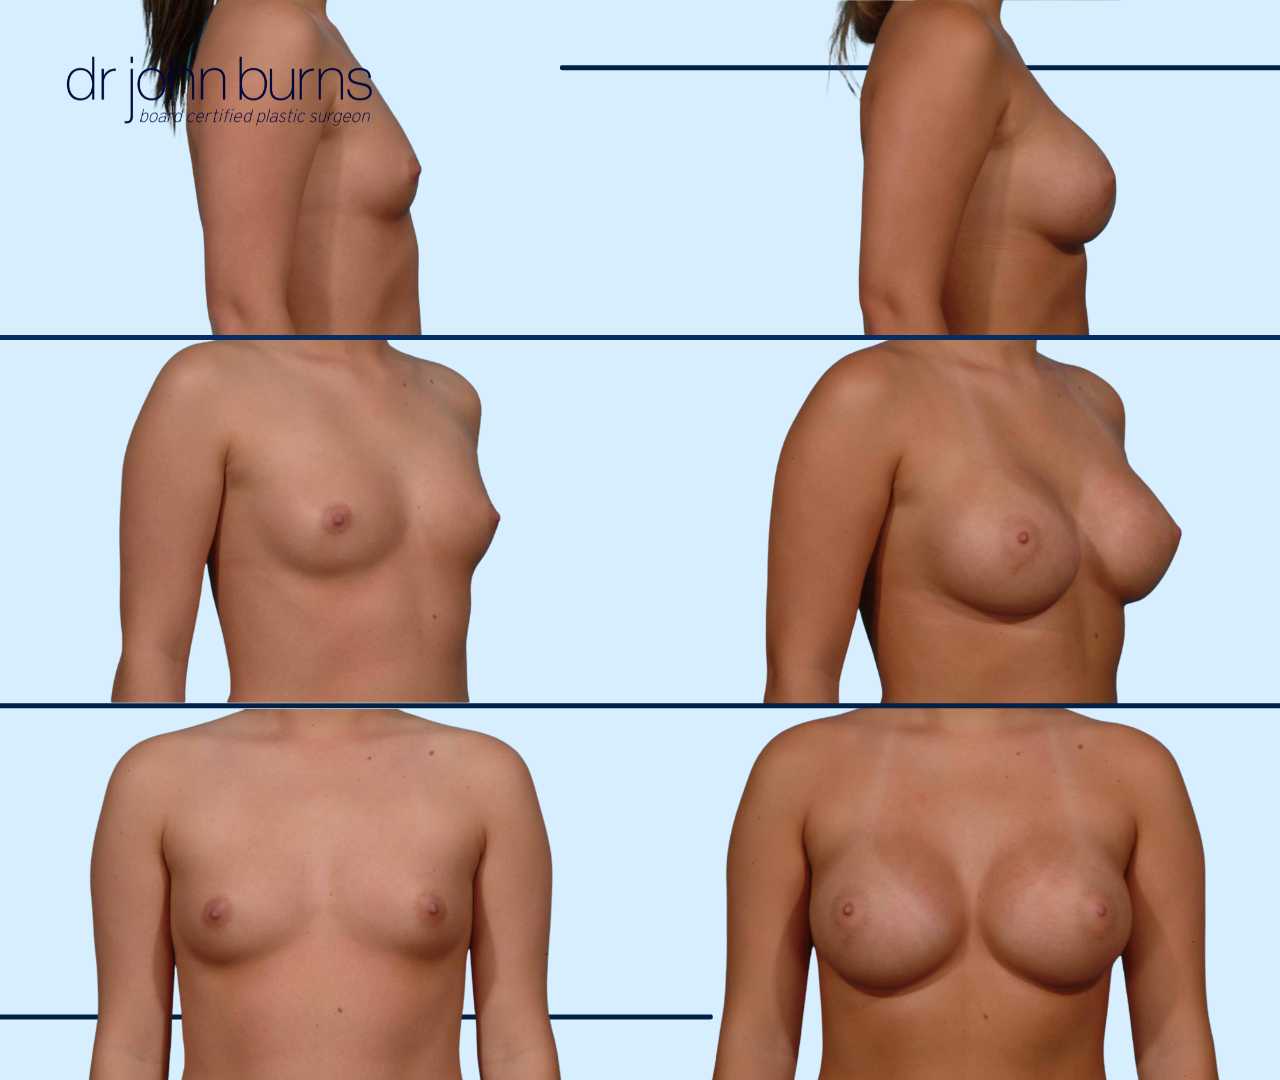 Breast Augmentation Results by Dr. John Burns in Dallas, Texas